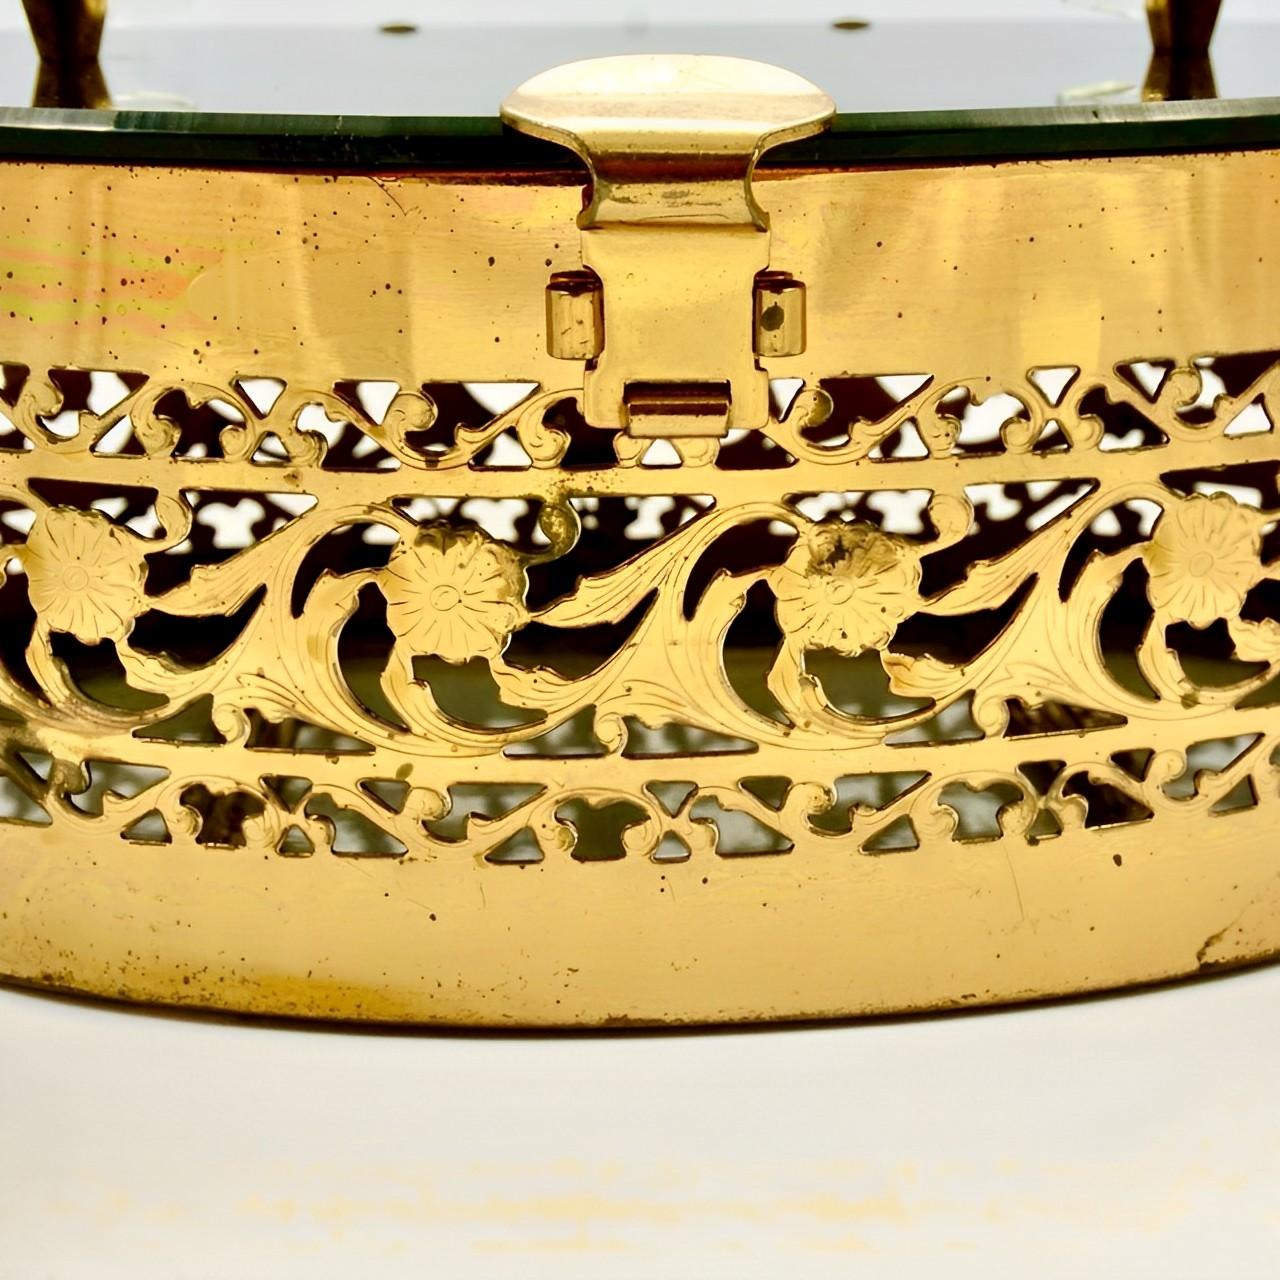 Lovely gold plated flower filigree handbag, with a black lucite lid and clear lucite handle and bottom. Measuring width 18.9 cm / 7.4 inches by height 7.4 cm / 2.9 inches. The handle drop is 10.8 cm / 4.25 inches. The bag has scratching as expected,